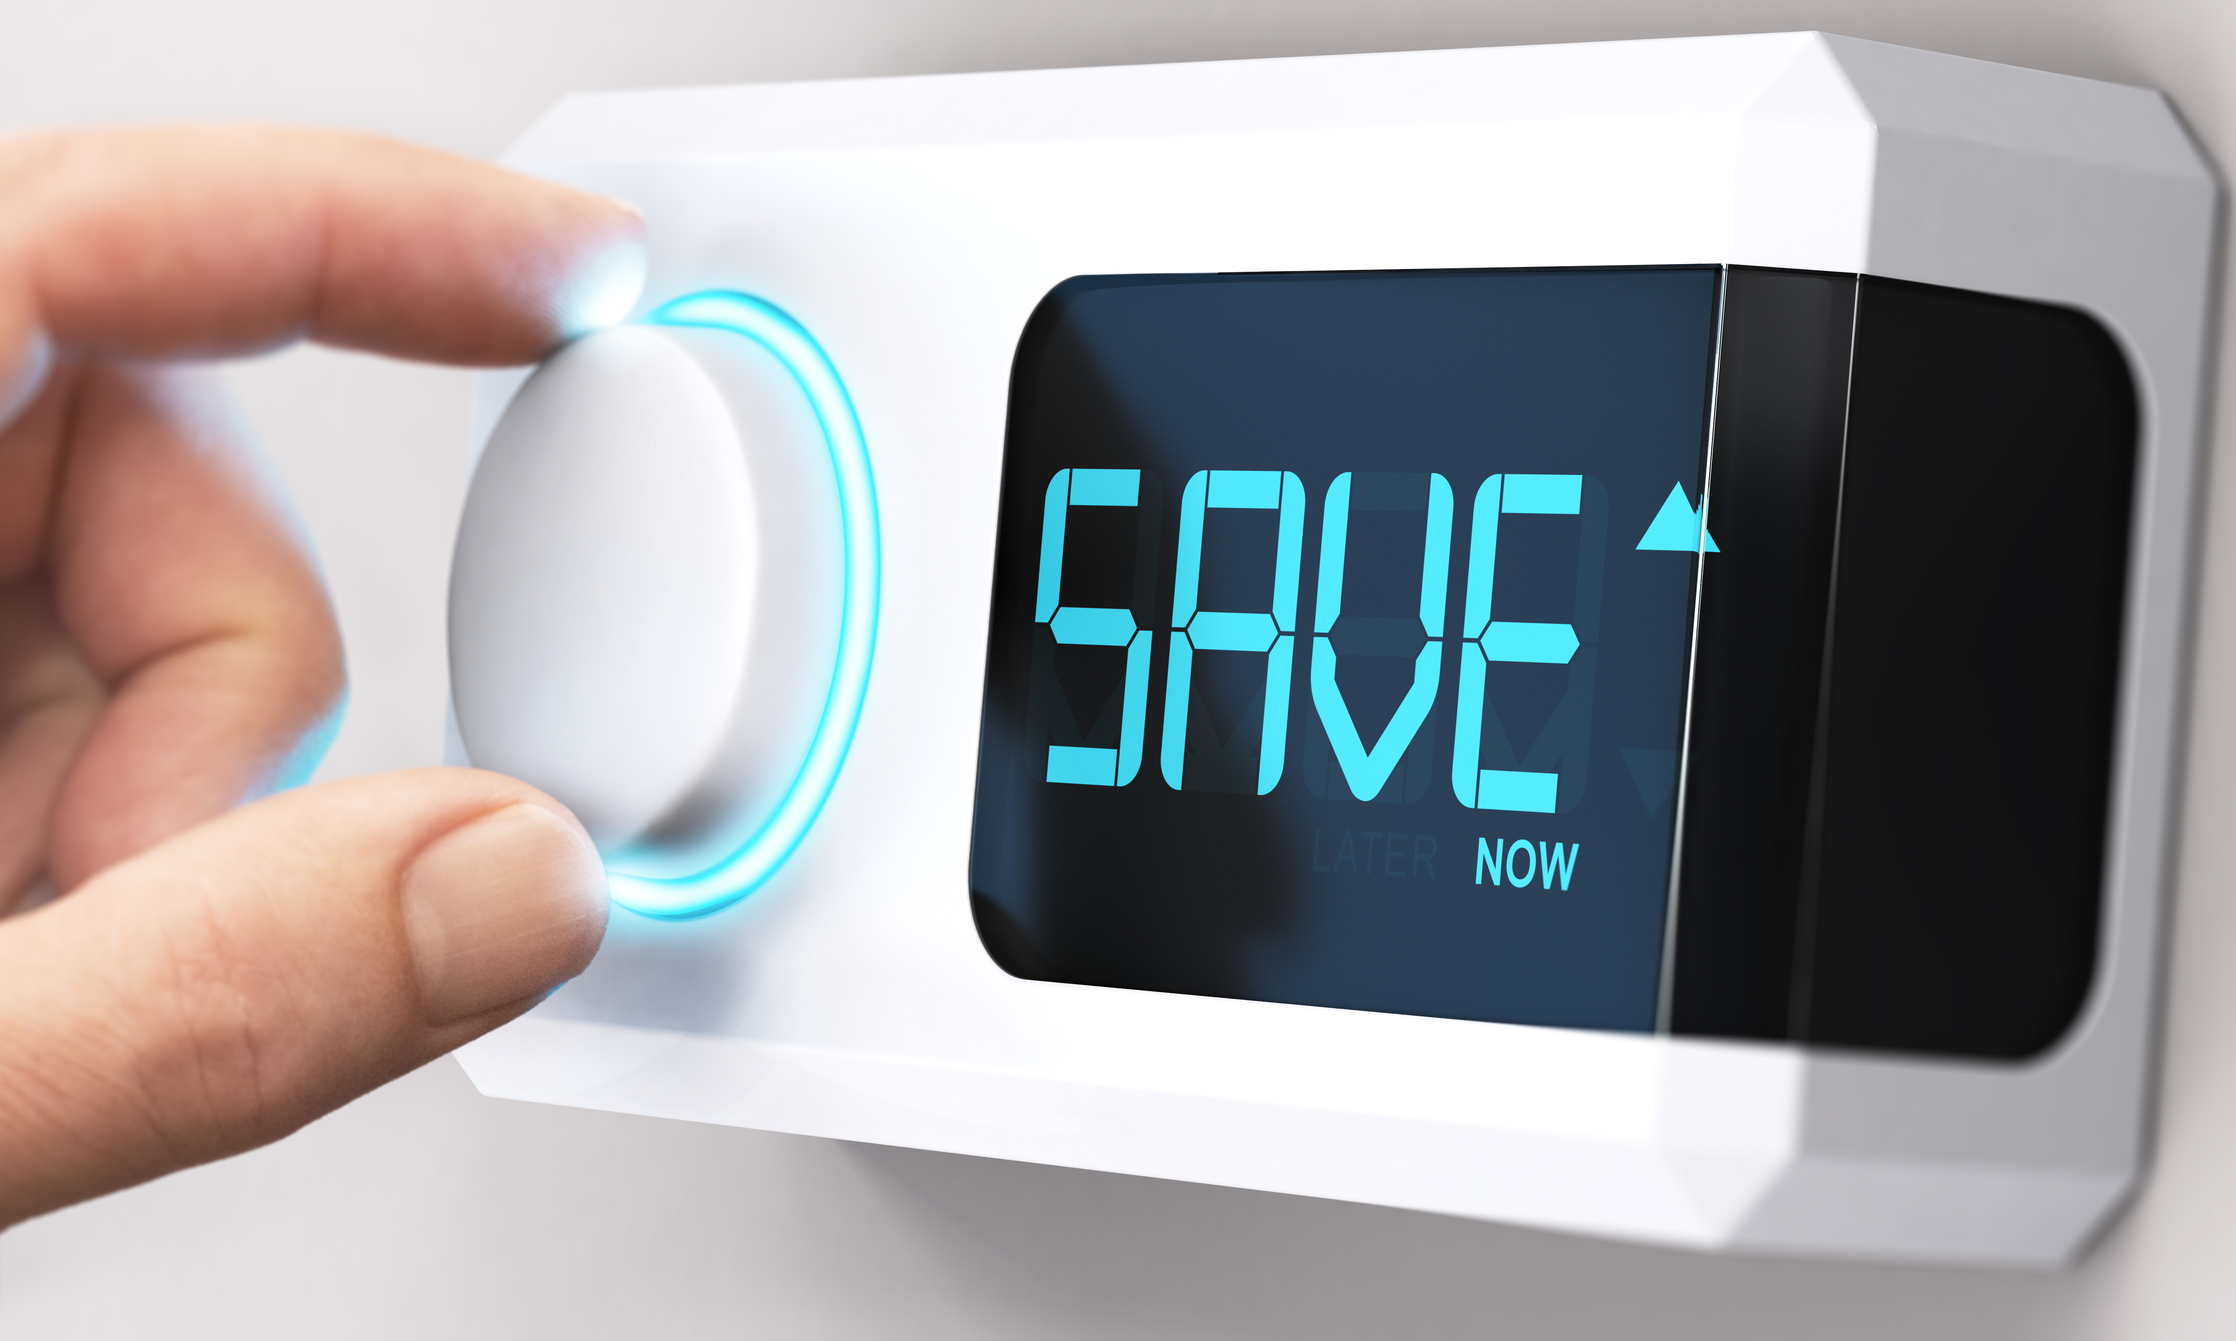 Hand on a thermostat knob that says “Save Now” on the face of the system